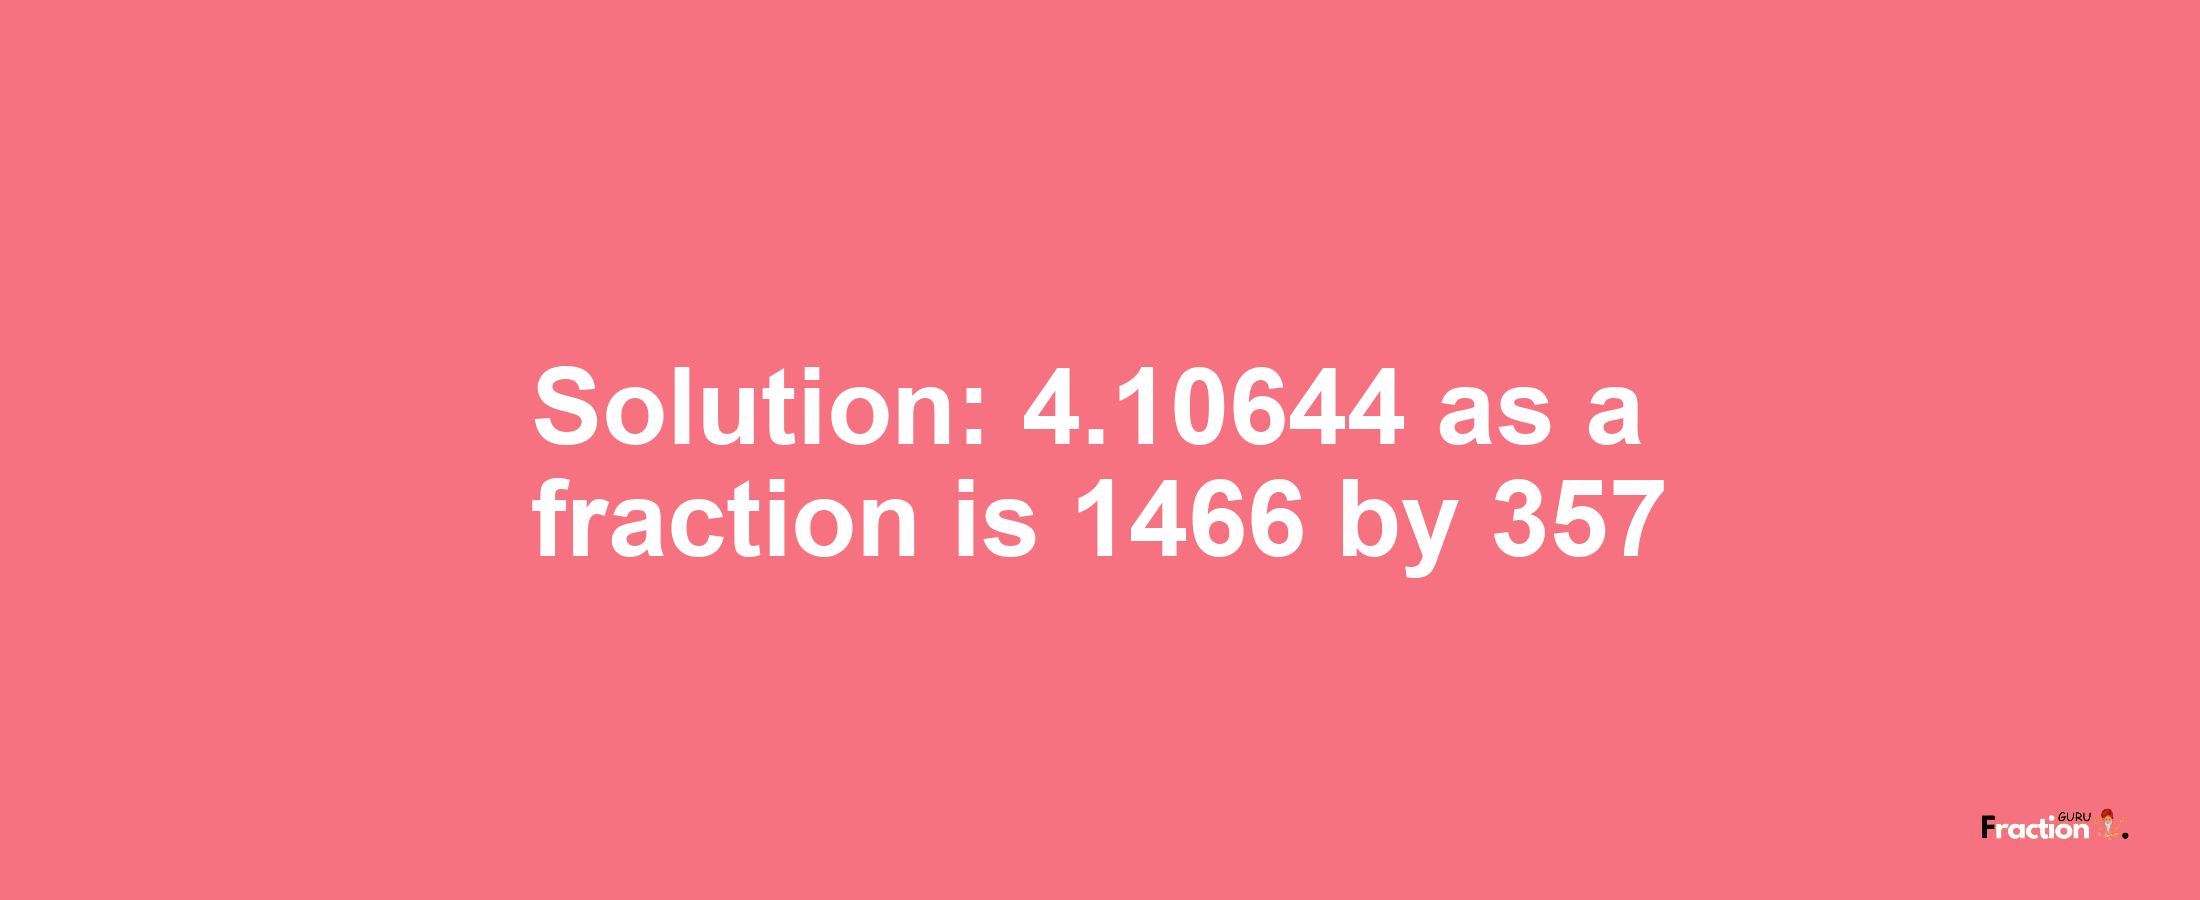 Solution:4.10644 as a fraction is 1466/357